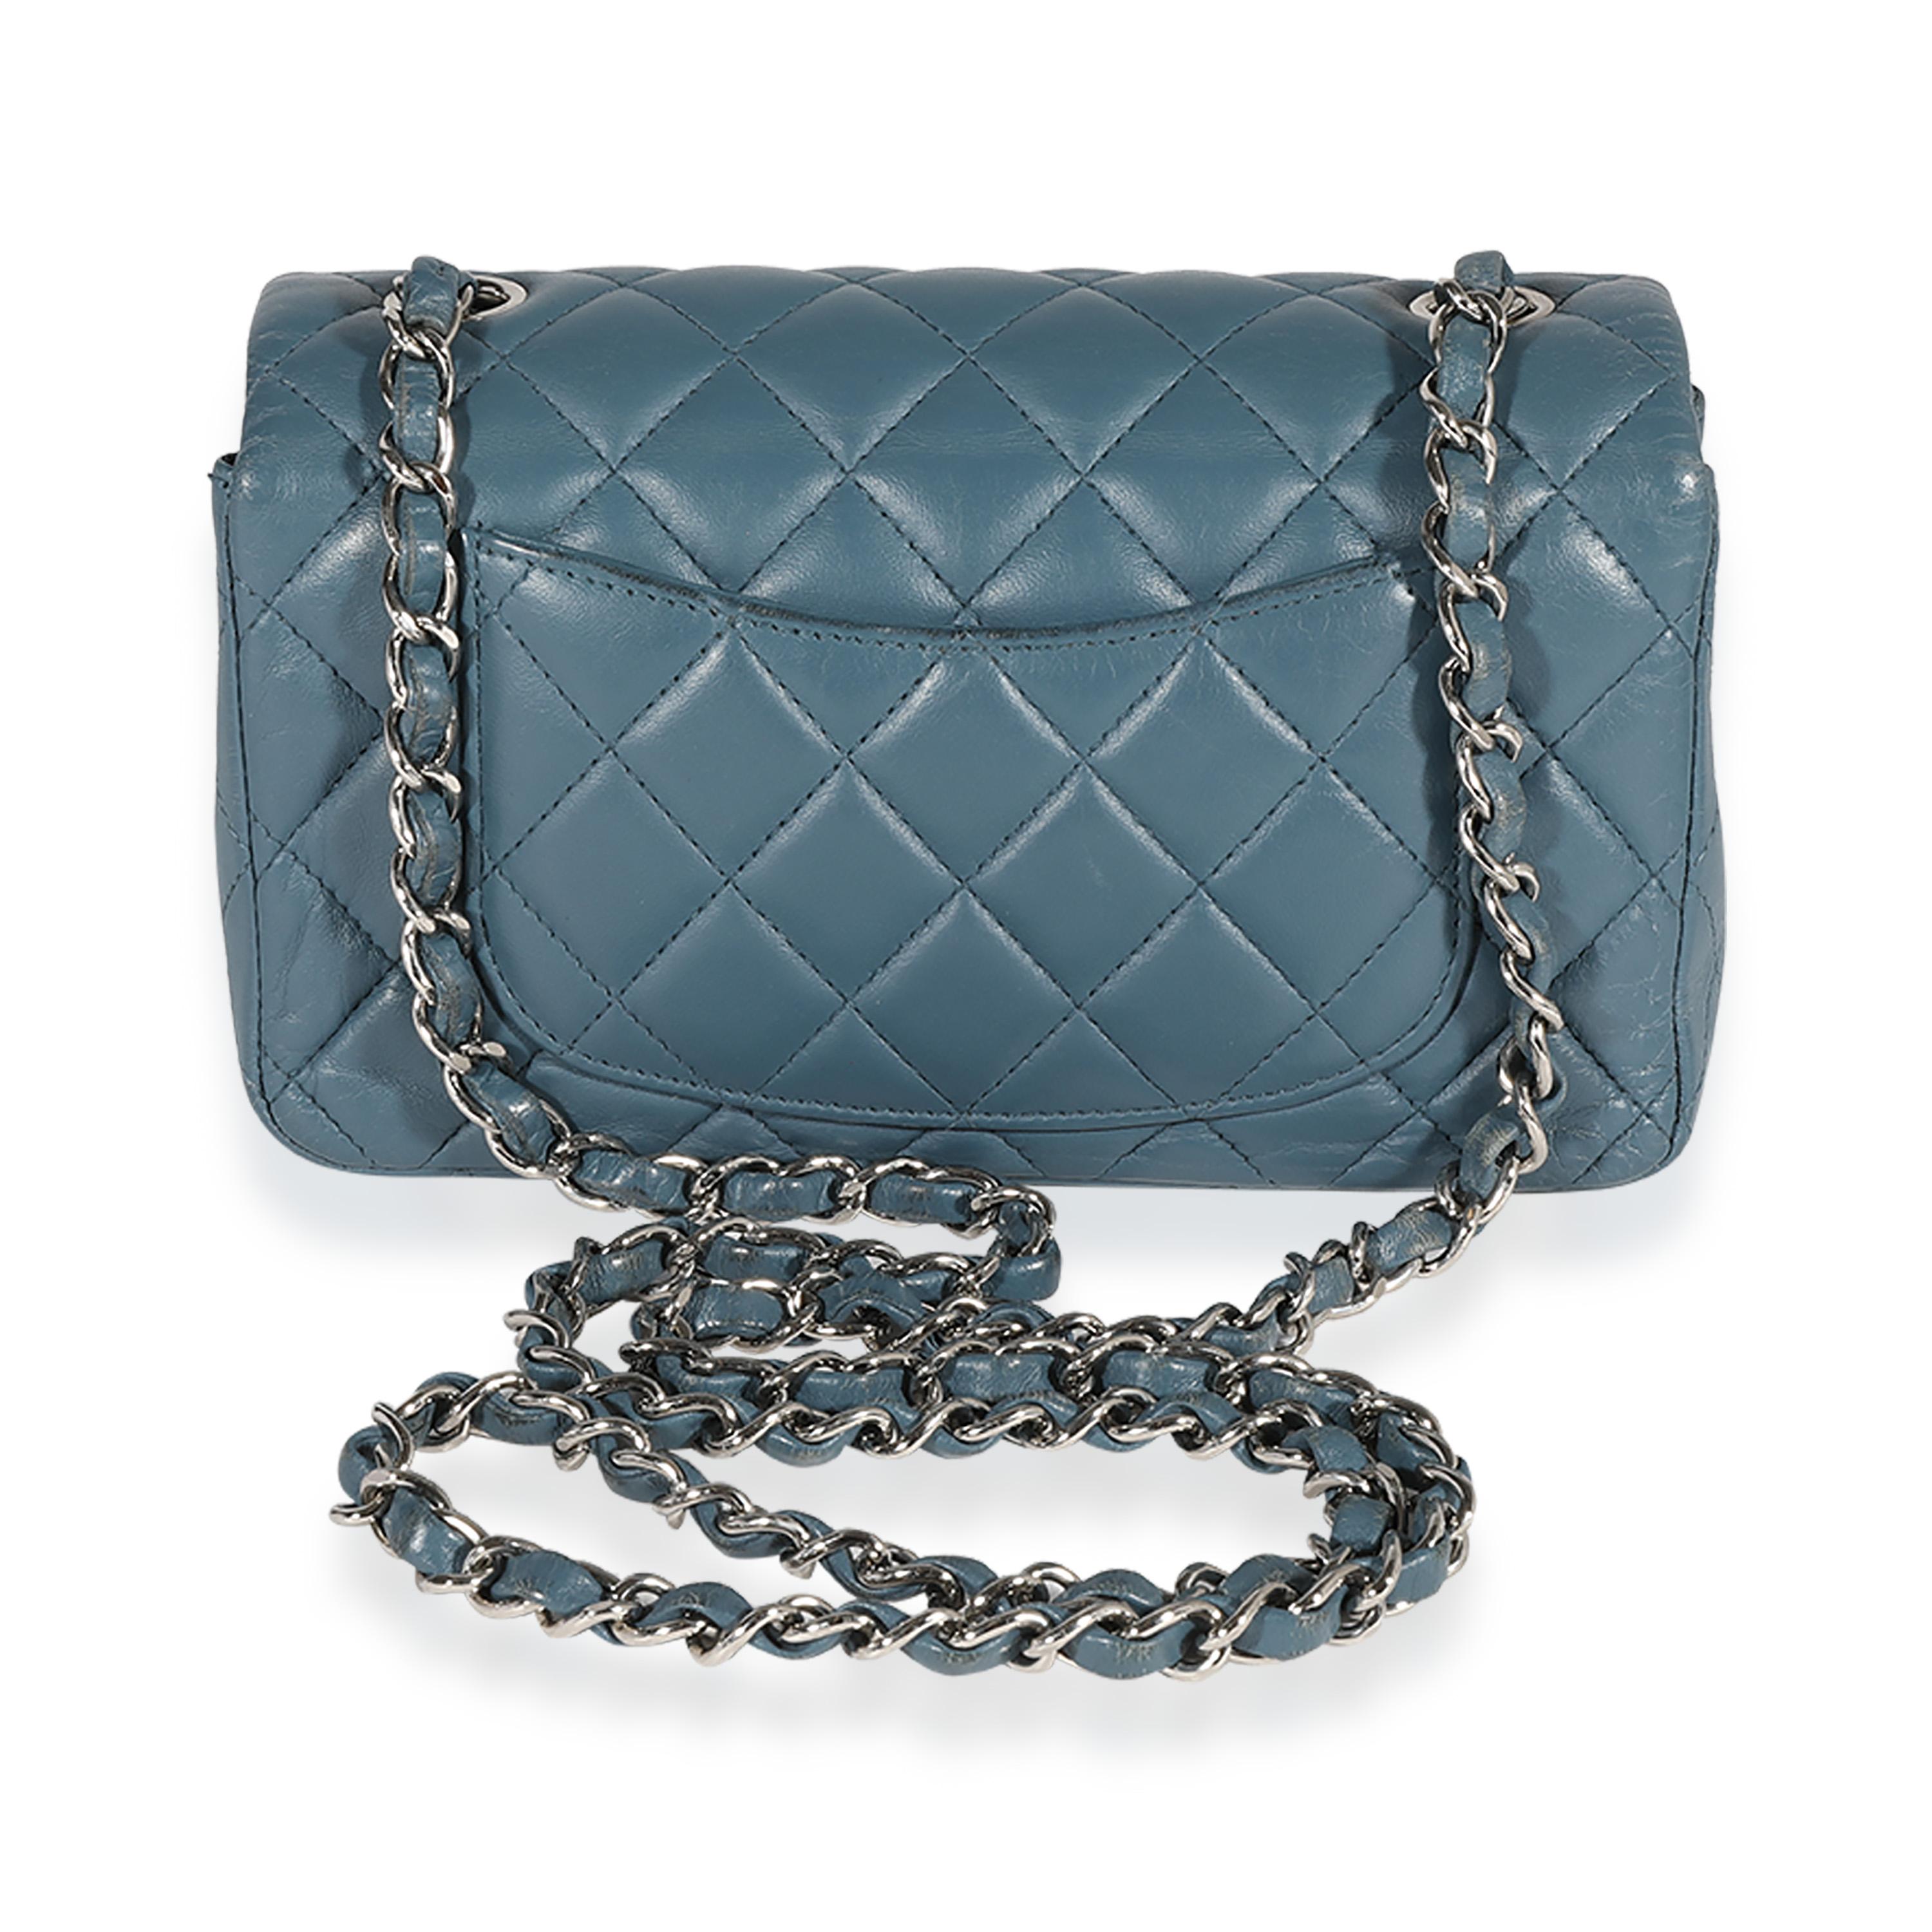 Listing Title: Chanel Blue Quilted Lambskin Mini Rectangular Classic Flap Bag
SKU: 123028
Condition: Pre-owned 
Handbag Condition: Very Good
Condition Comments: Very Good Condition. Heavy scuffing and wrinkling at corners and throughout exterior.